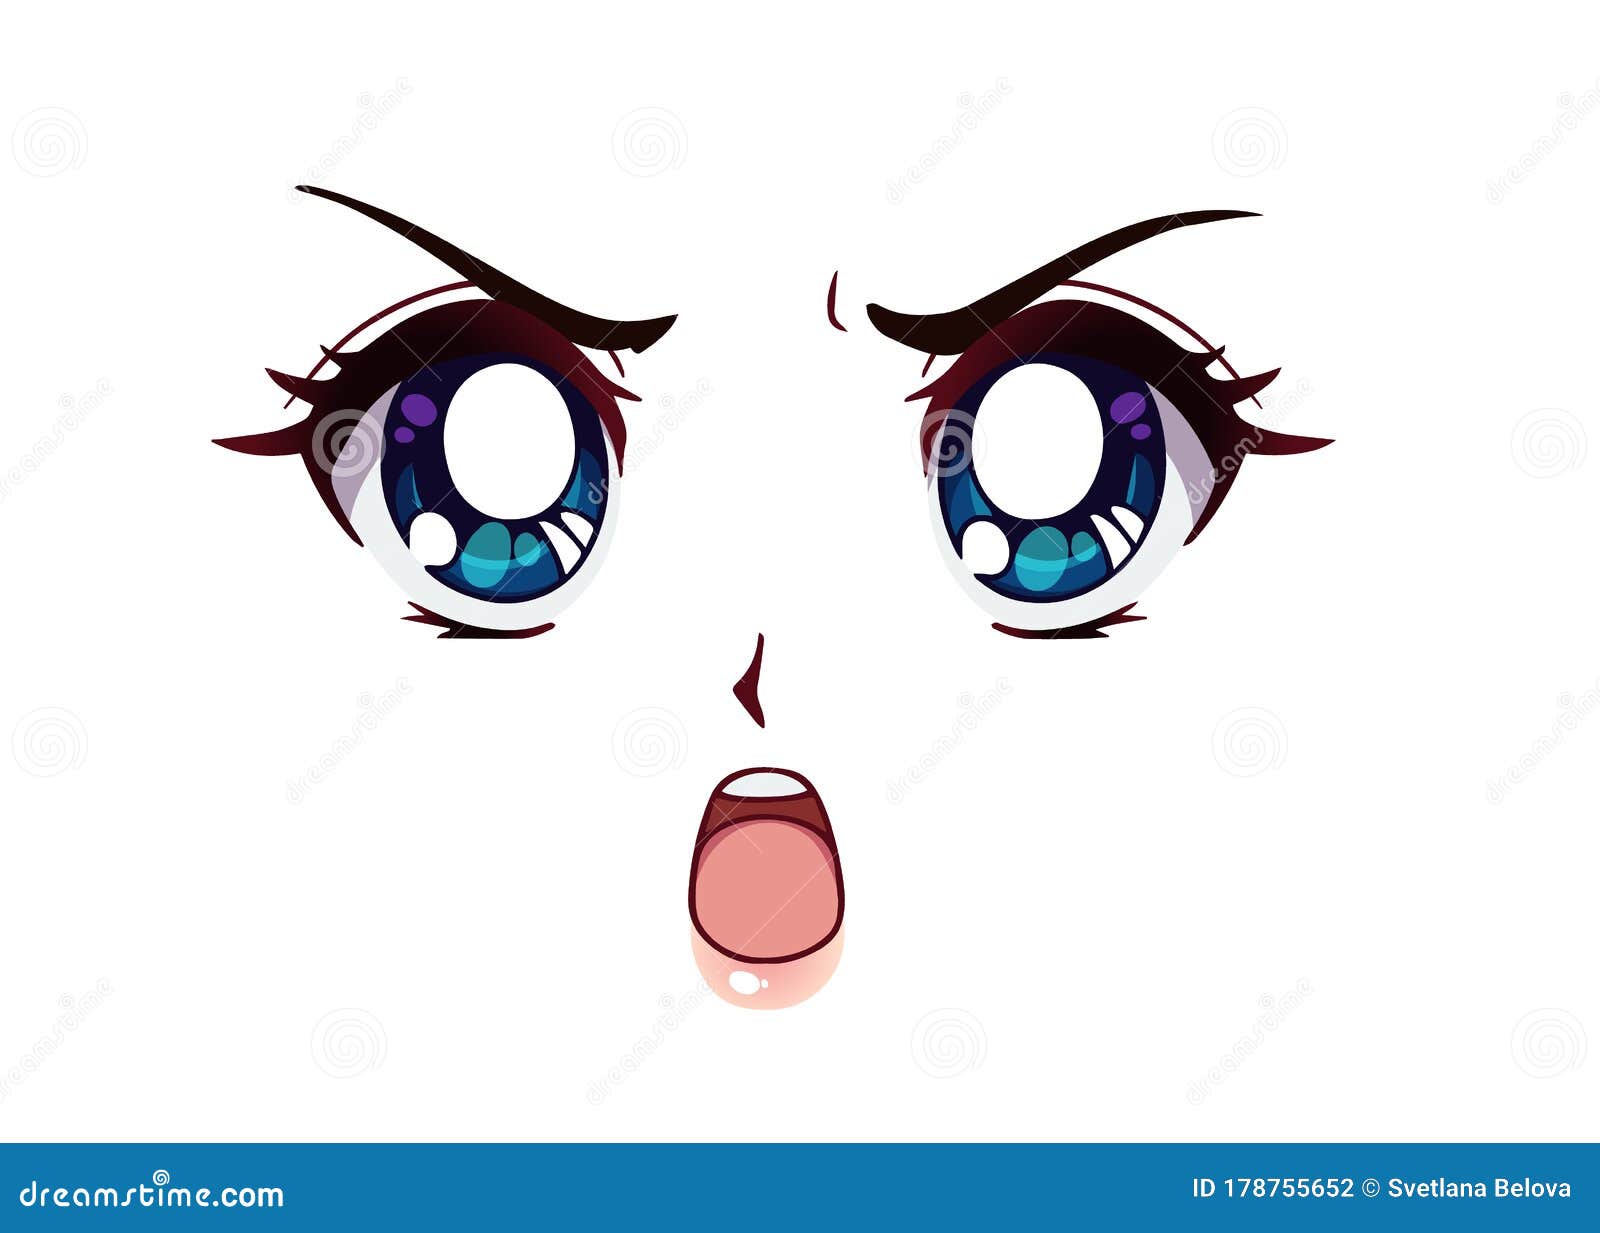 Anime Angry Eyes Stock Illustrations 426 Anime Angry Eyes Stock Illustrations Vectors Clipart Dreamstime So many amazing anime characters get angry easily, which makes. dreamstime com